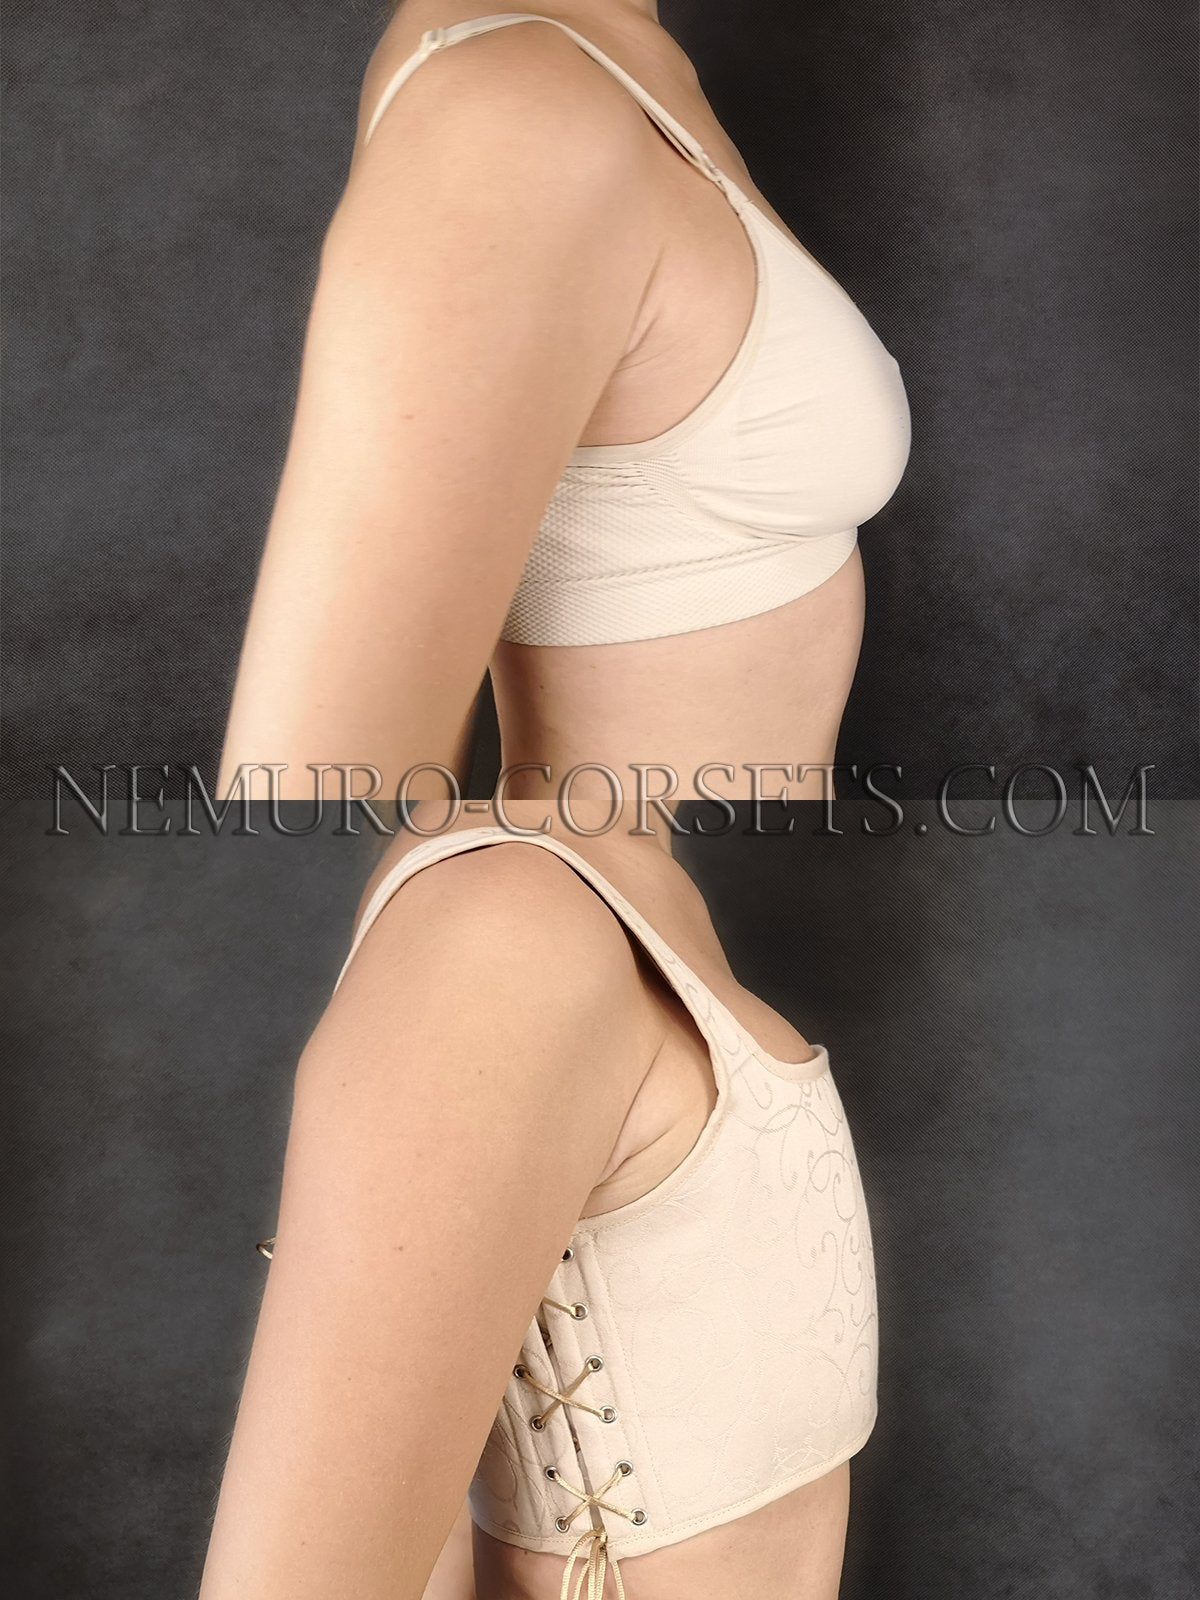 breast binder products for sale